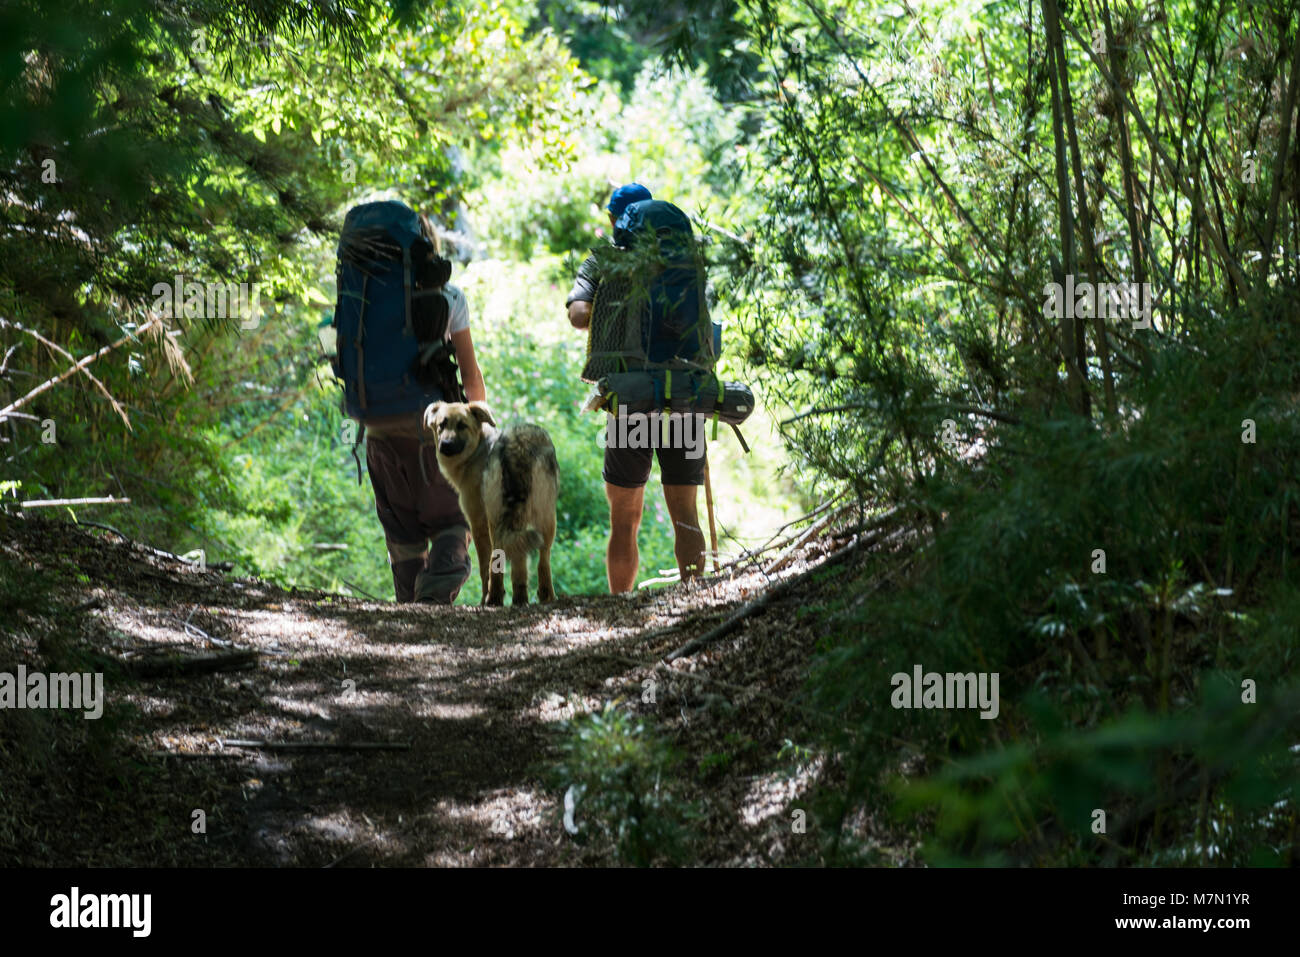 An active couple with their dog hiking in nature Stock Photo